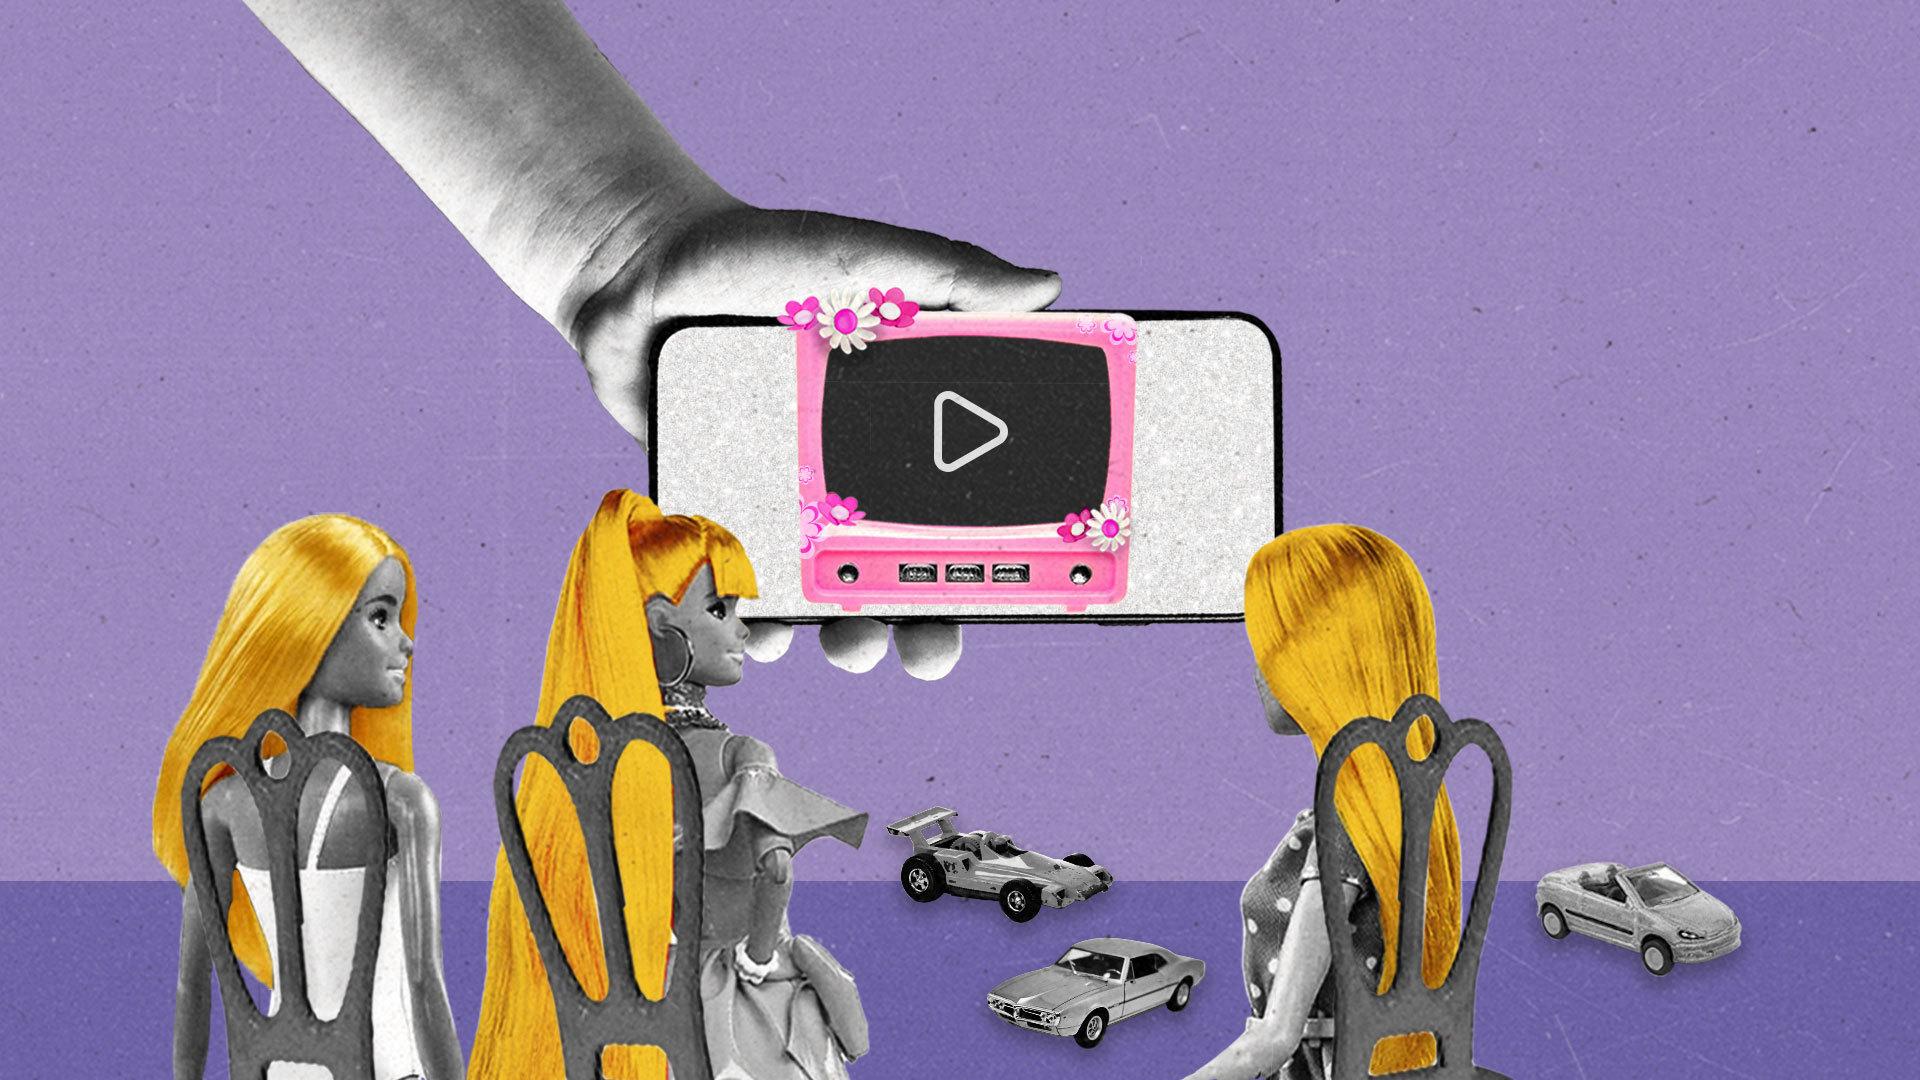 Three Barbie dolls watch a Barbie streaming TV within a smartphone being held from above as toy cars litter the floor.